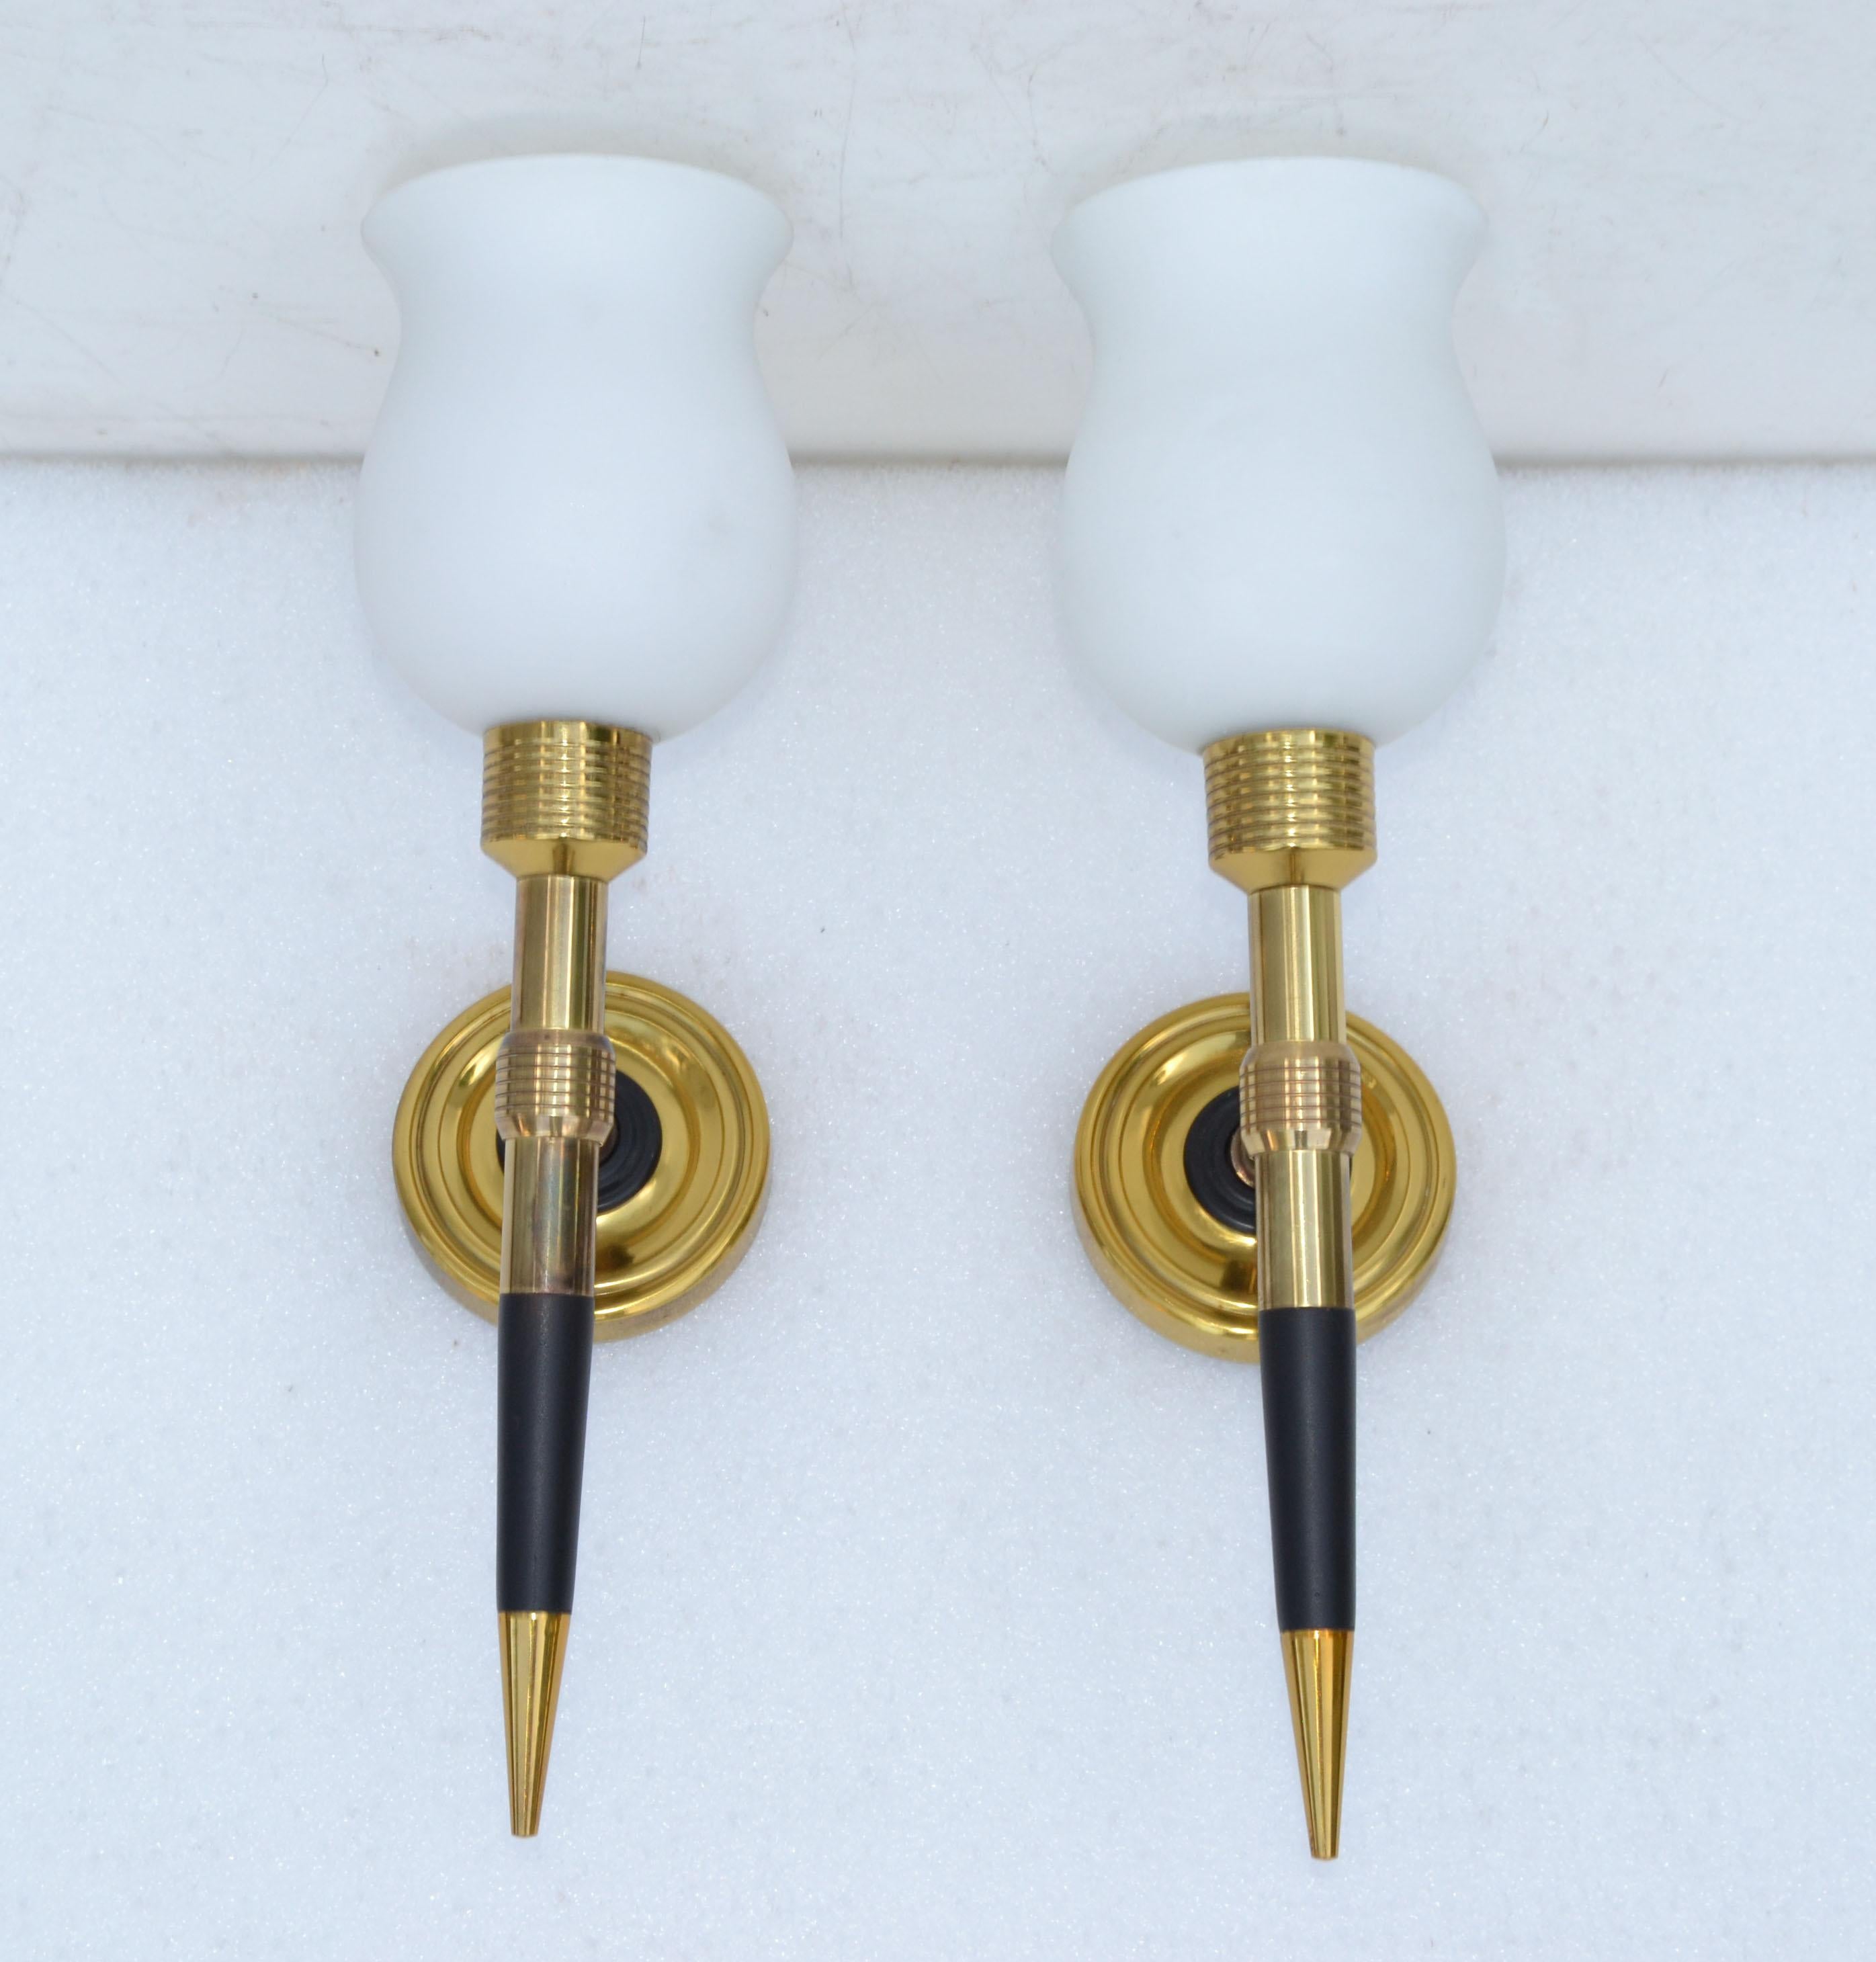 French Maison Lancel Brass & Wood Sconces, Wall Lights Blown Opaline Shade France, Pair For Sale